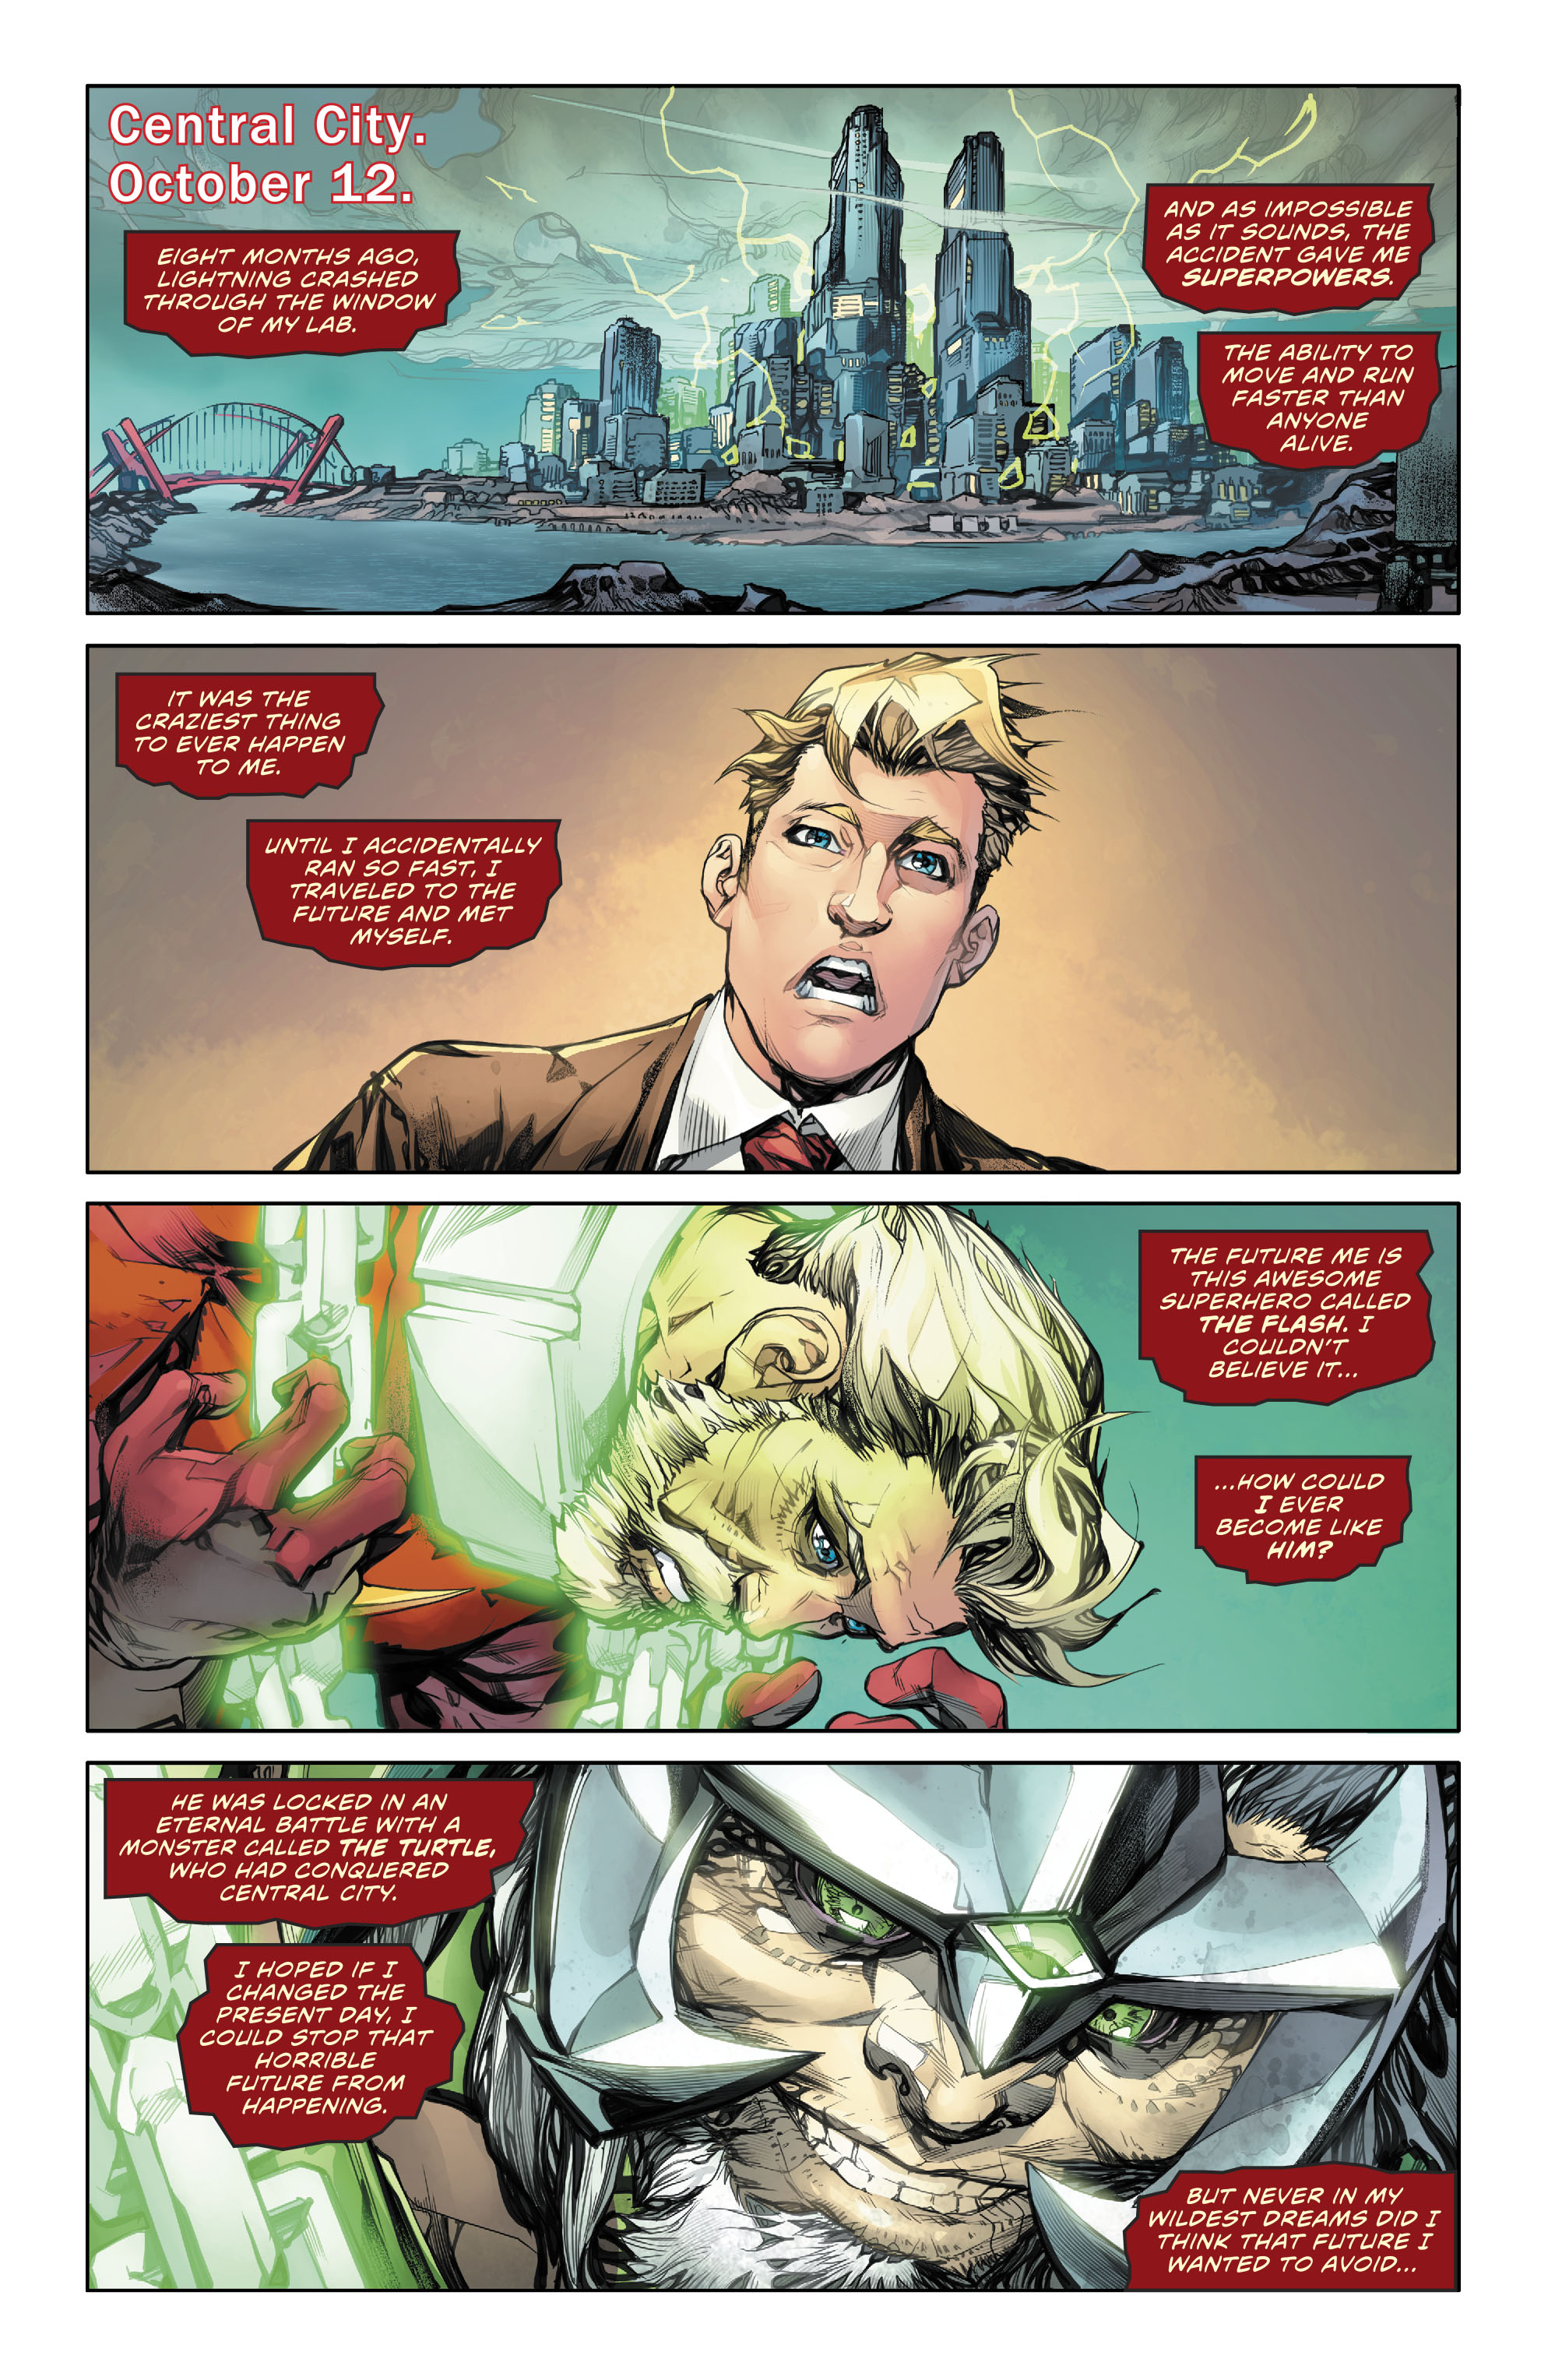 The Flash (2016-): Chapter 74 - Page 3